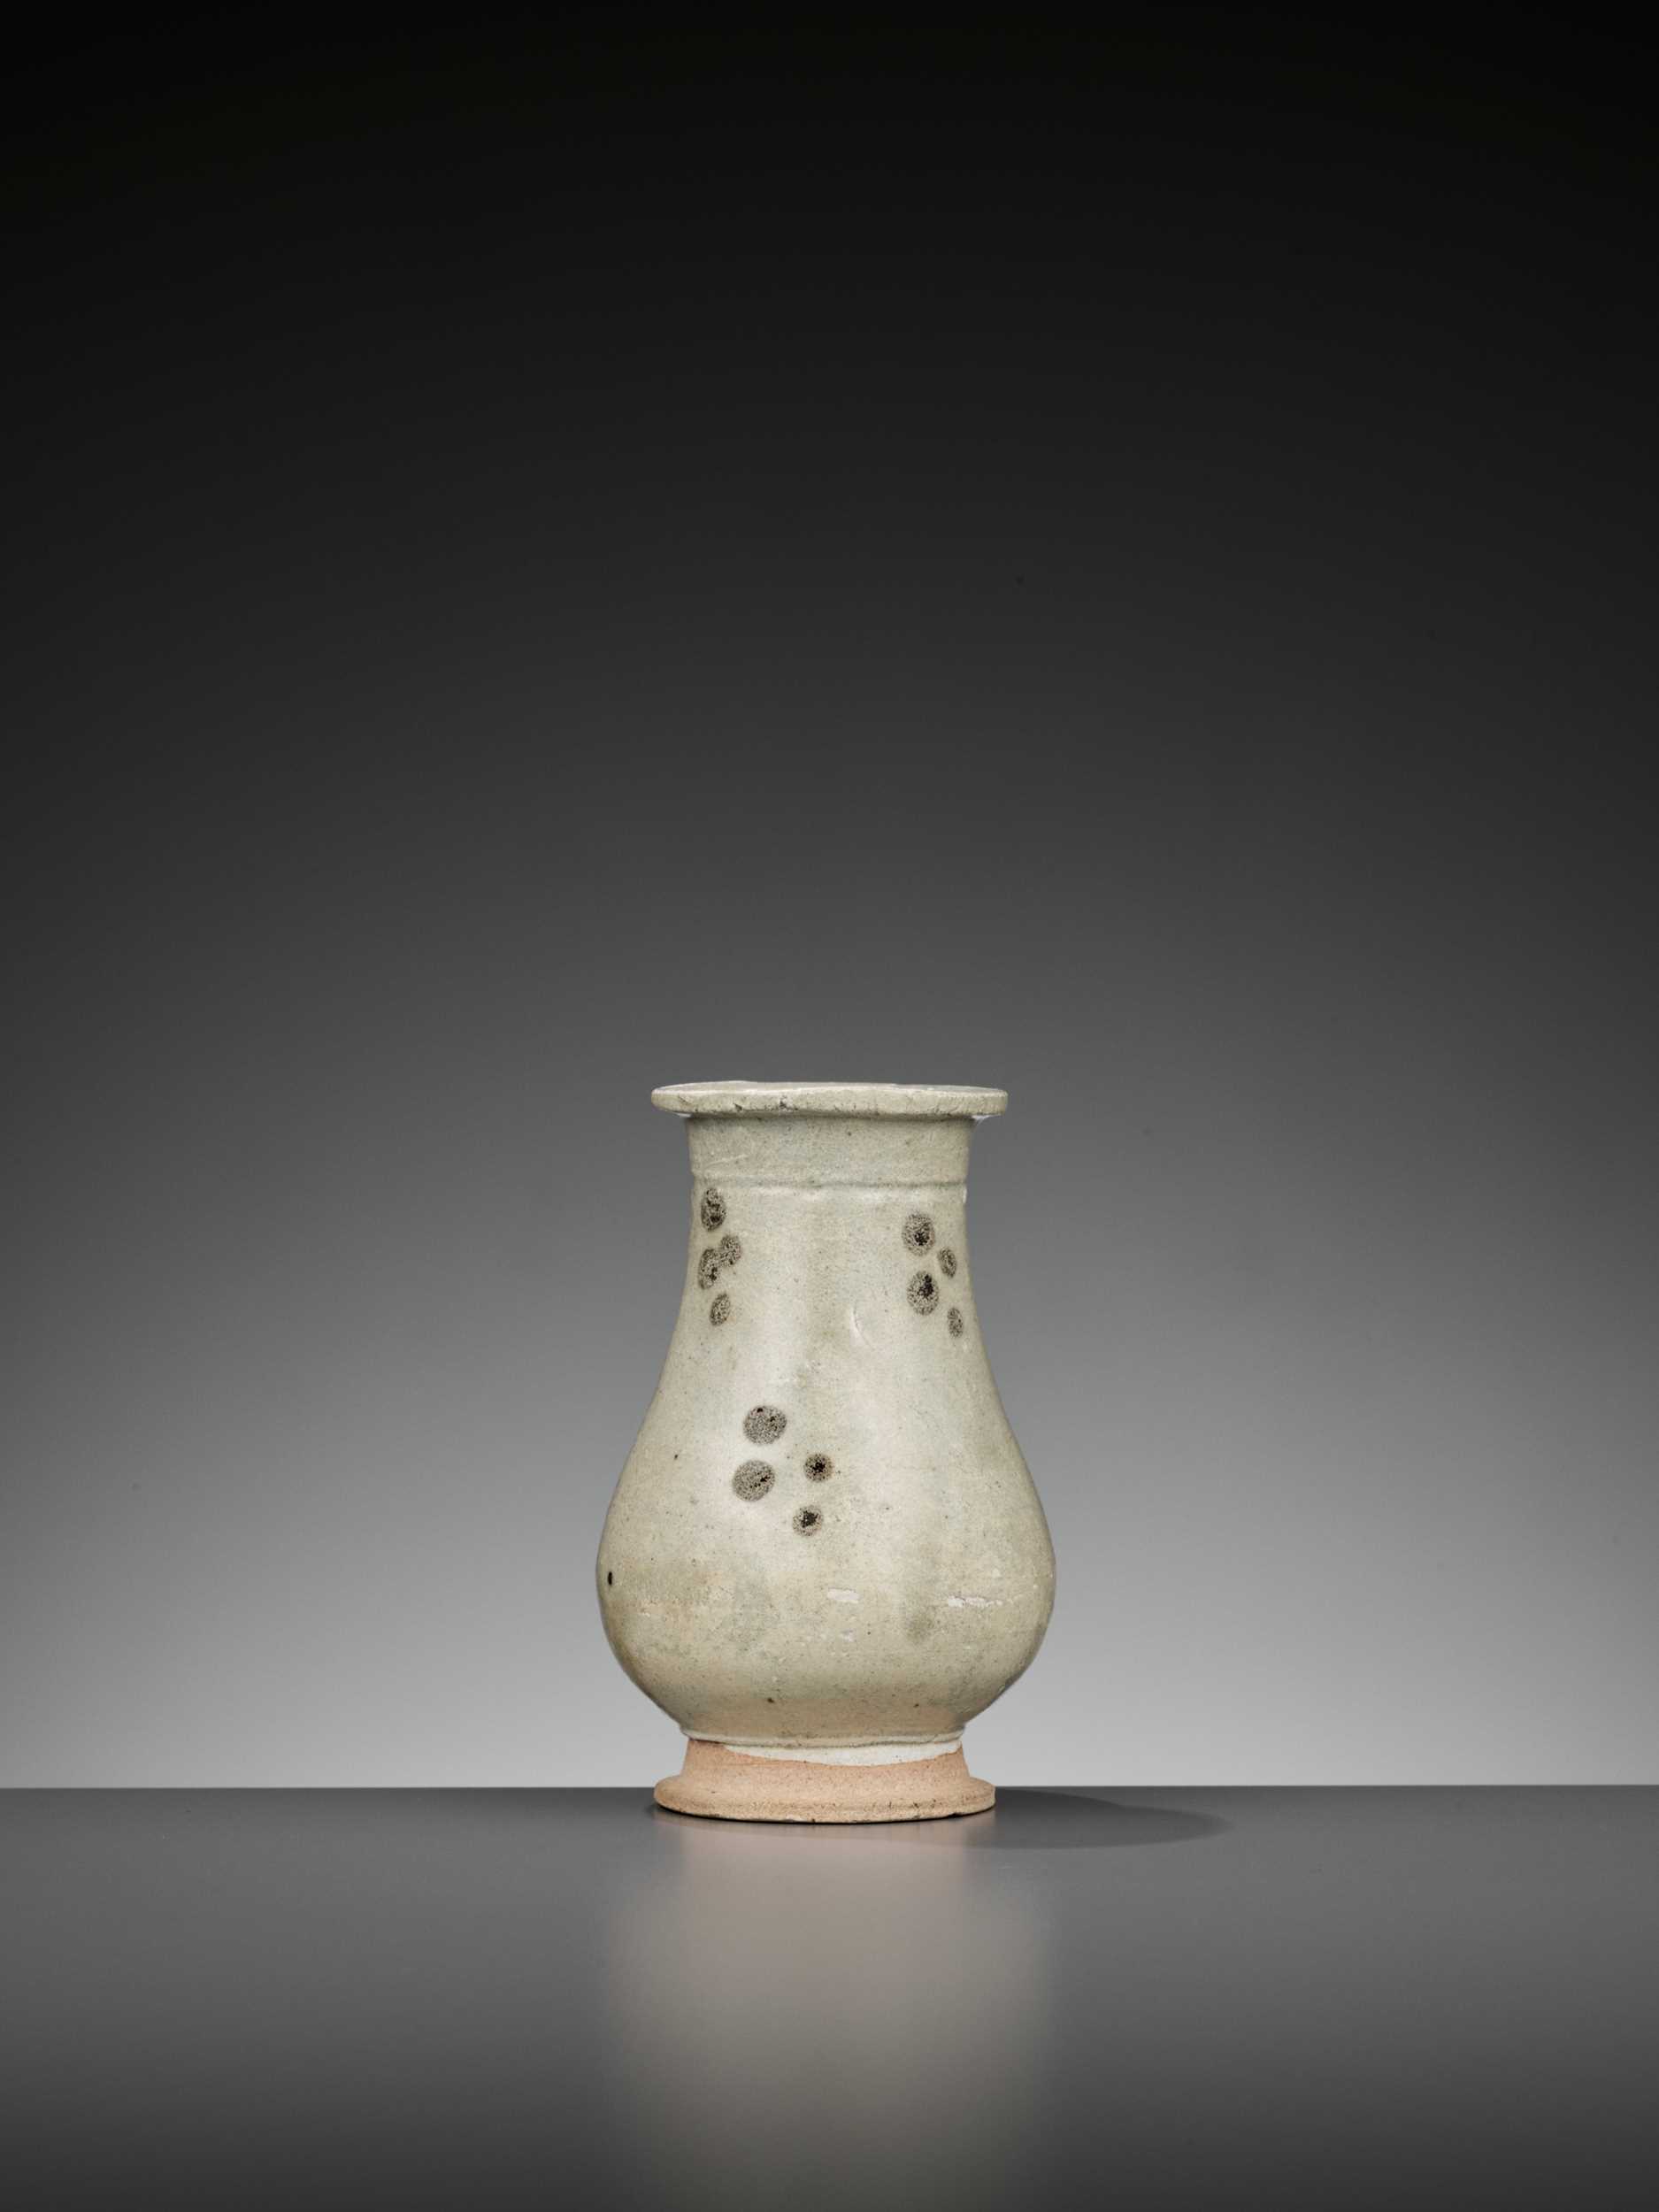 Lot 162 - A SMALL IRON-SPOTTED QINGBAI HU VASE, SONG TO YUAN DYNASTY